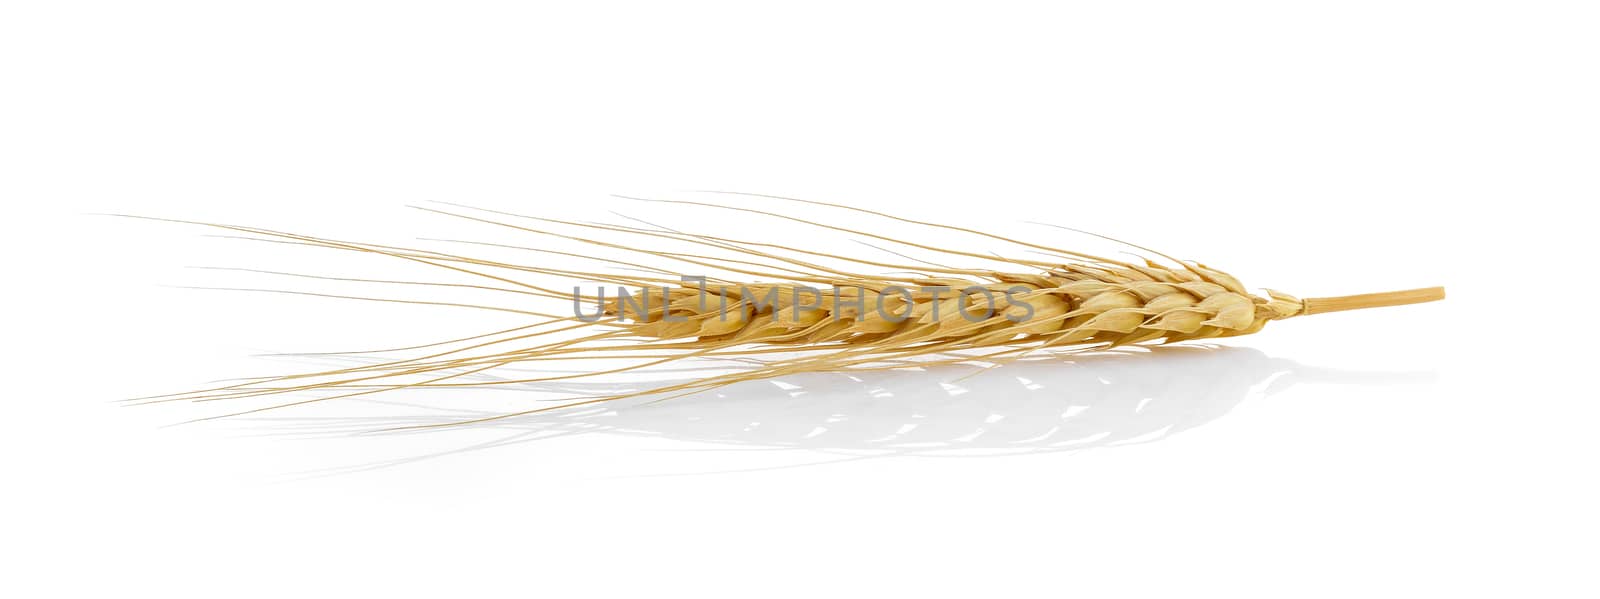 Closeup of a barley ear over a white background by sommai